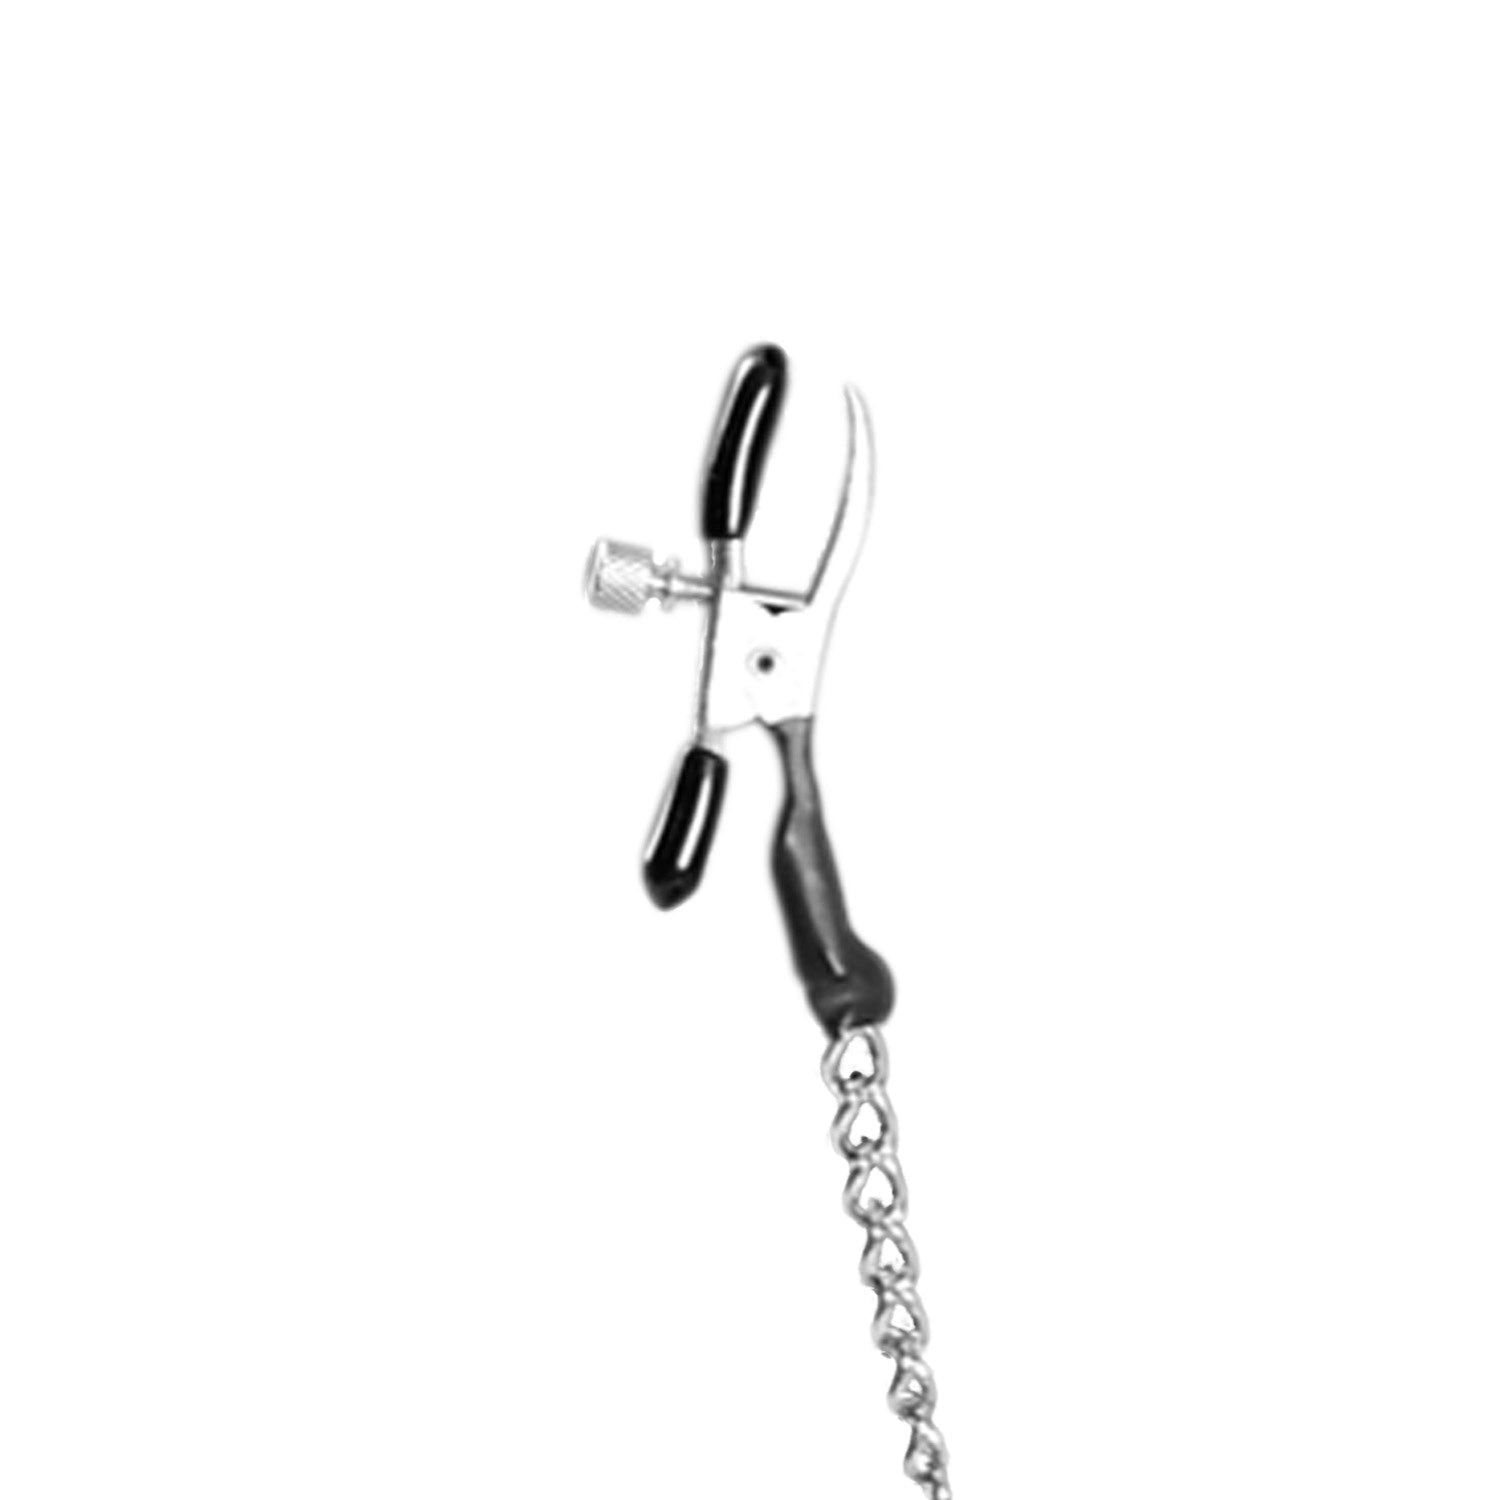 Fetish Fantasy Series Alligator Nipple Clamps - Nipple Clips with Metal Chain by Pipedream